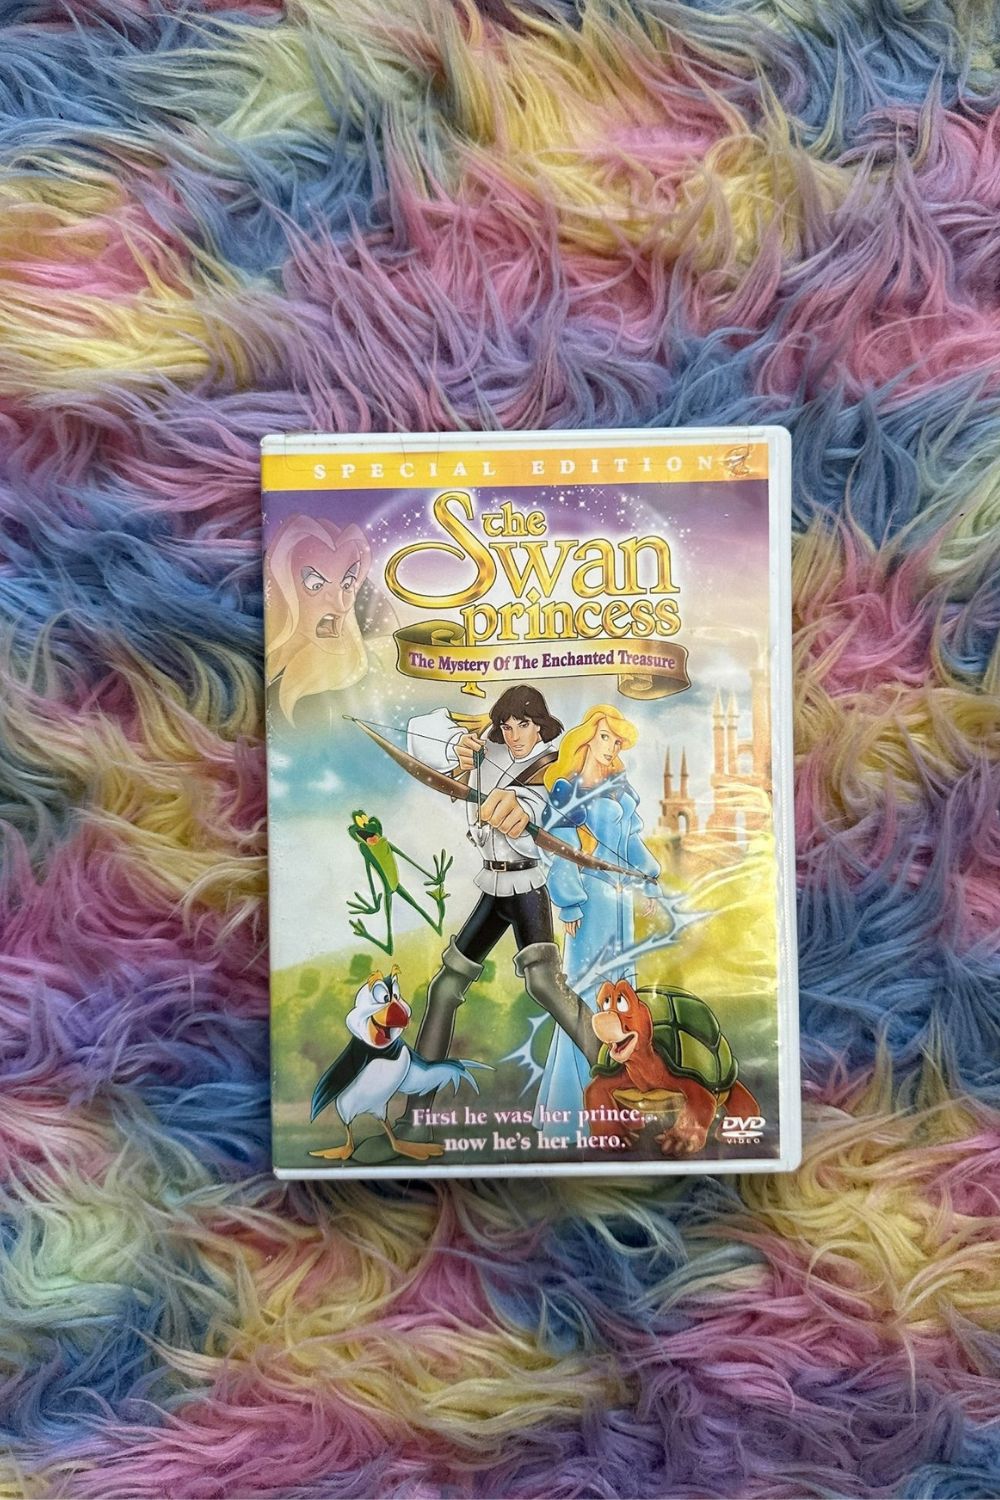 SPECIAL EDITION THE SWAN PRINCESS - THE MYSTERY OF THE ENCHANTED TREASURE DVD*